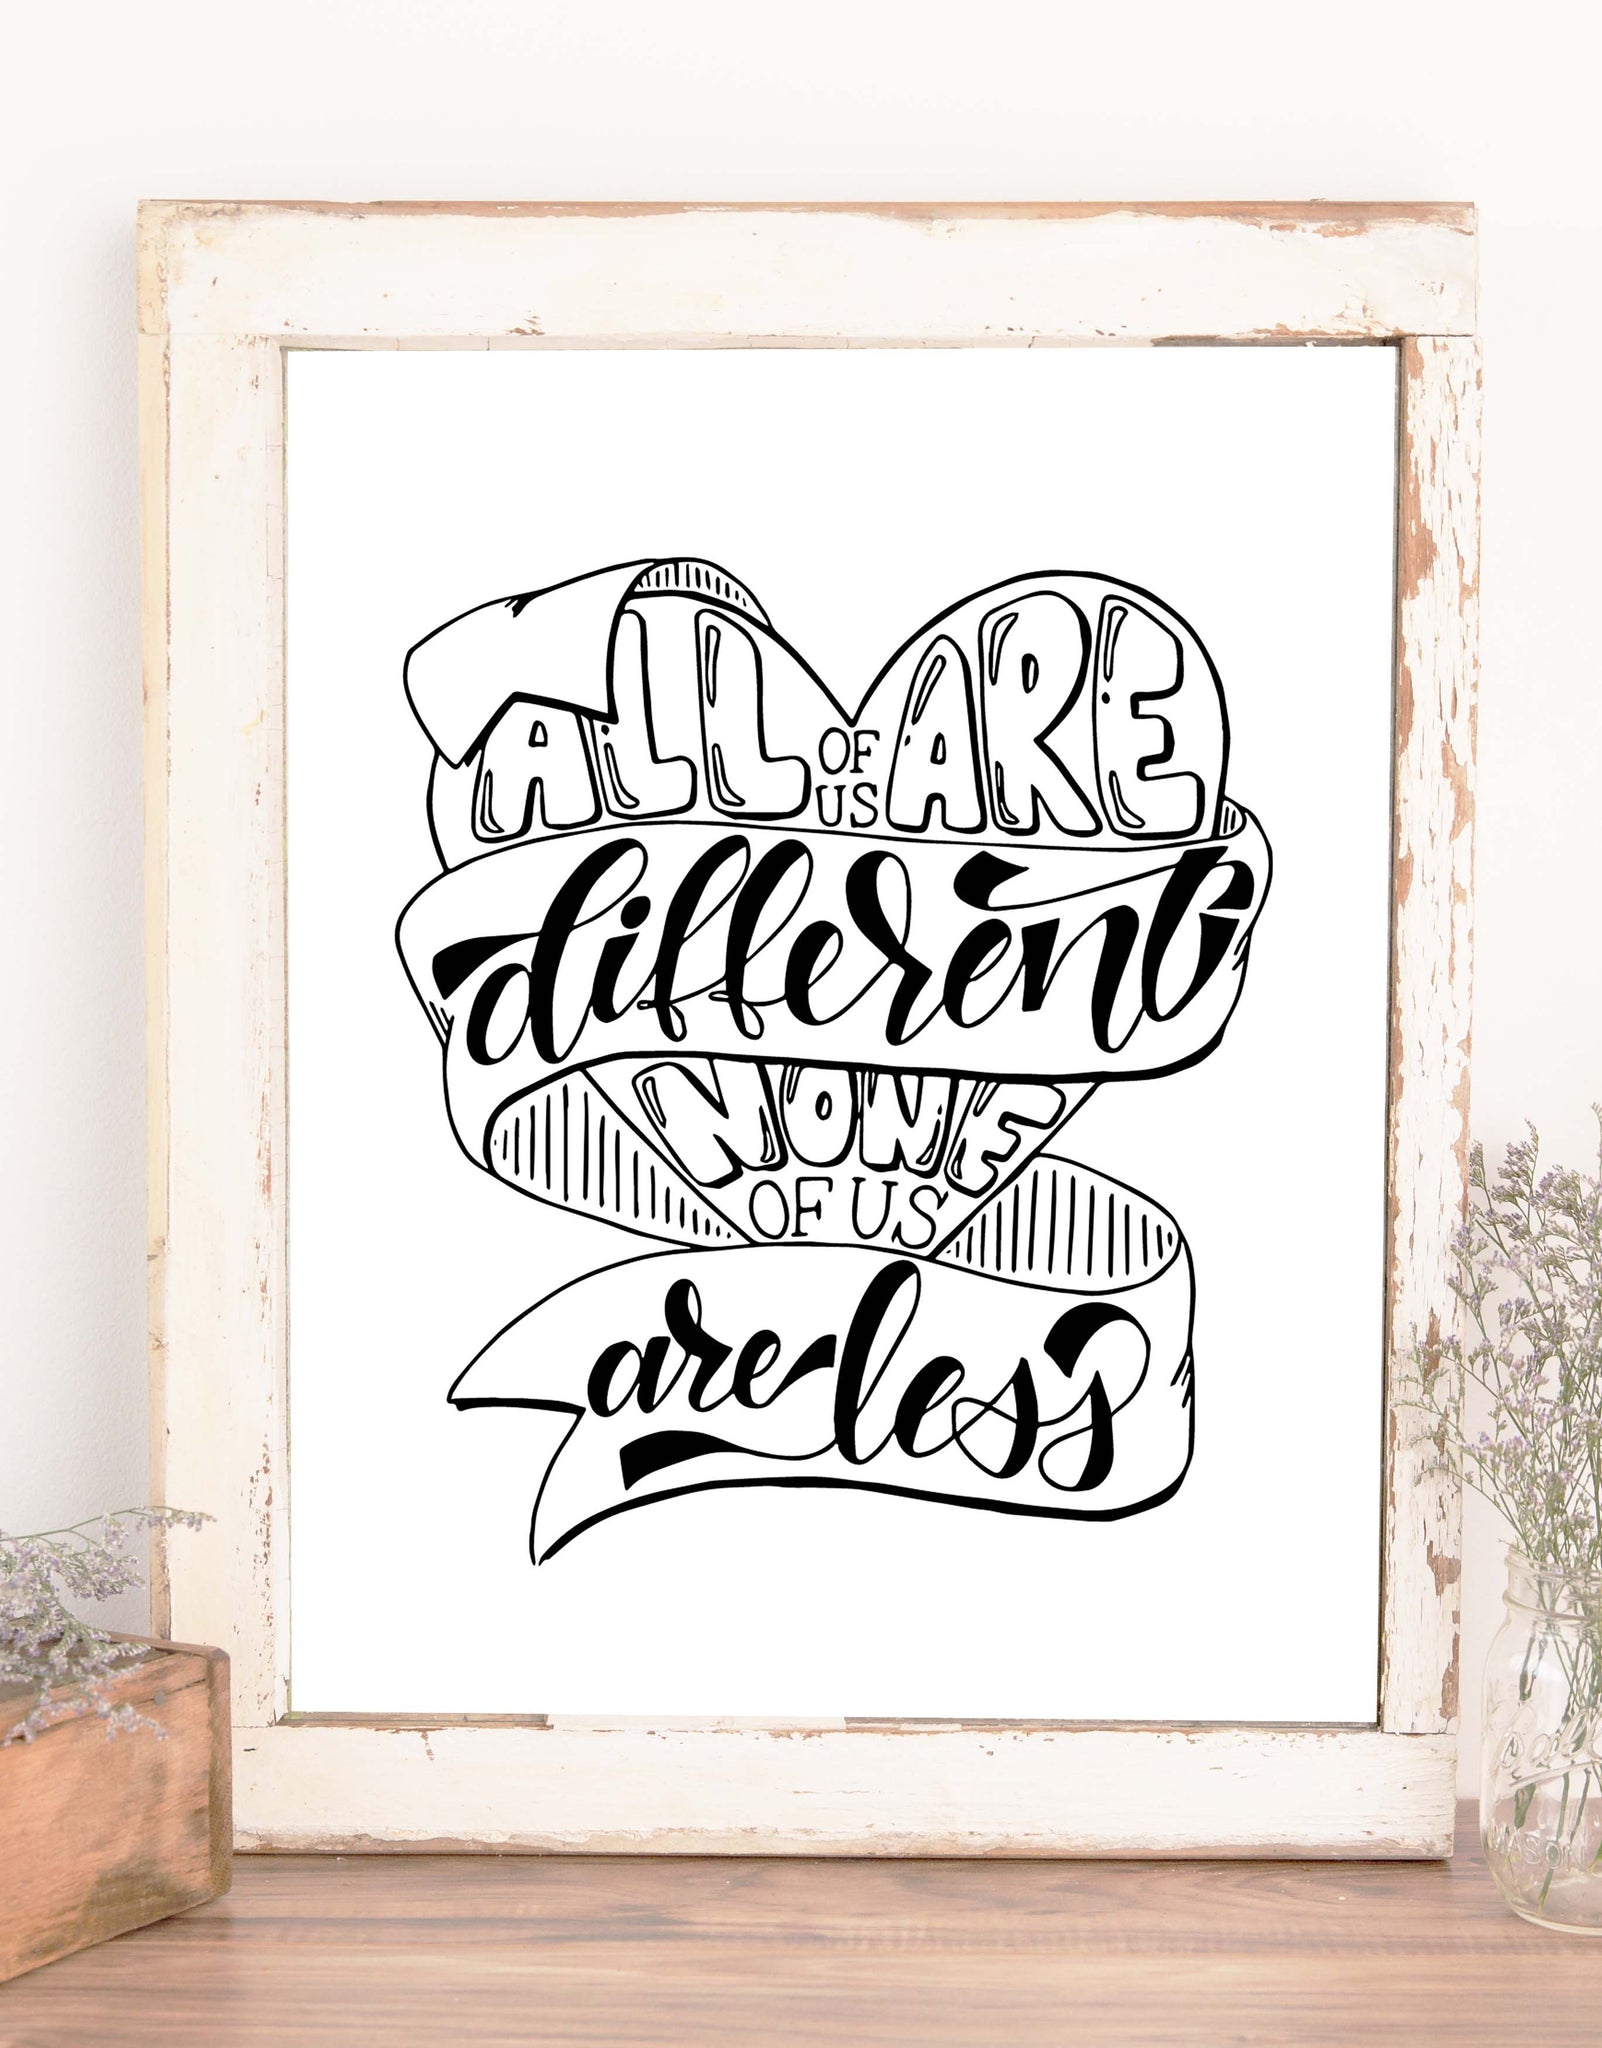 hand lettered wall art design in black and white that says all of us are different none of us are less with an illustration of a heart and winding ribbon shown in a rustic frame on a shelf with accessories